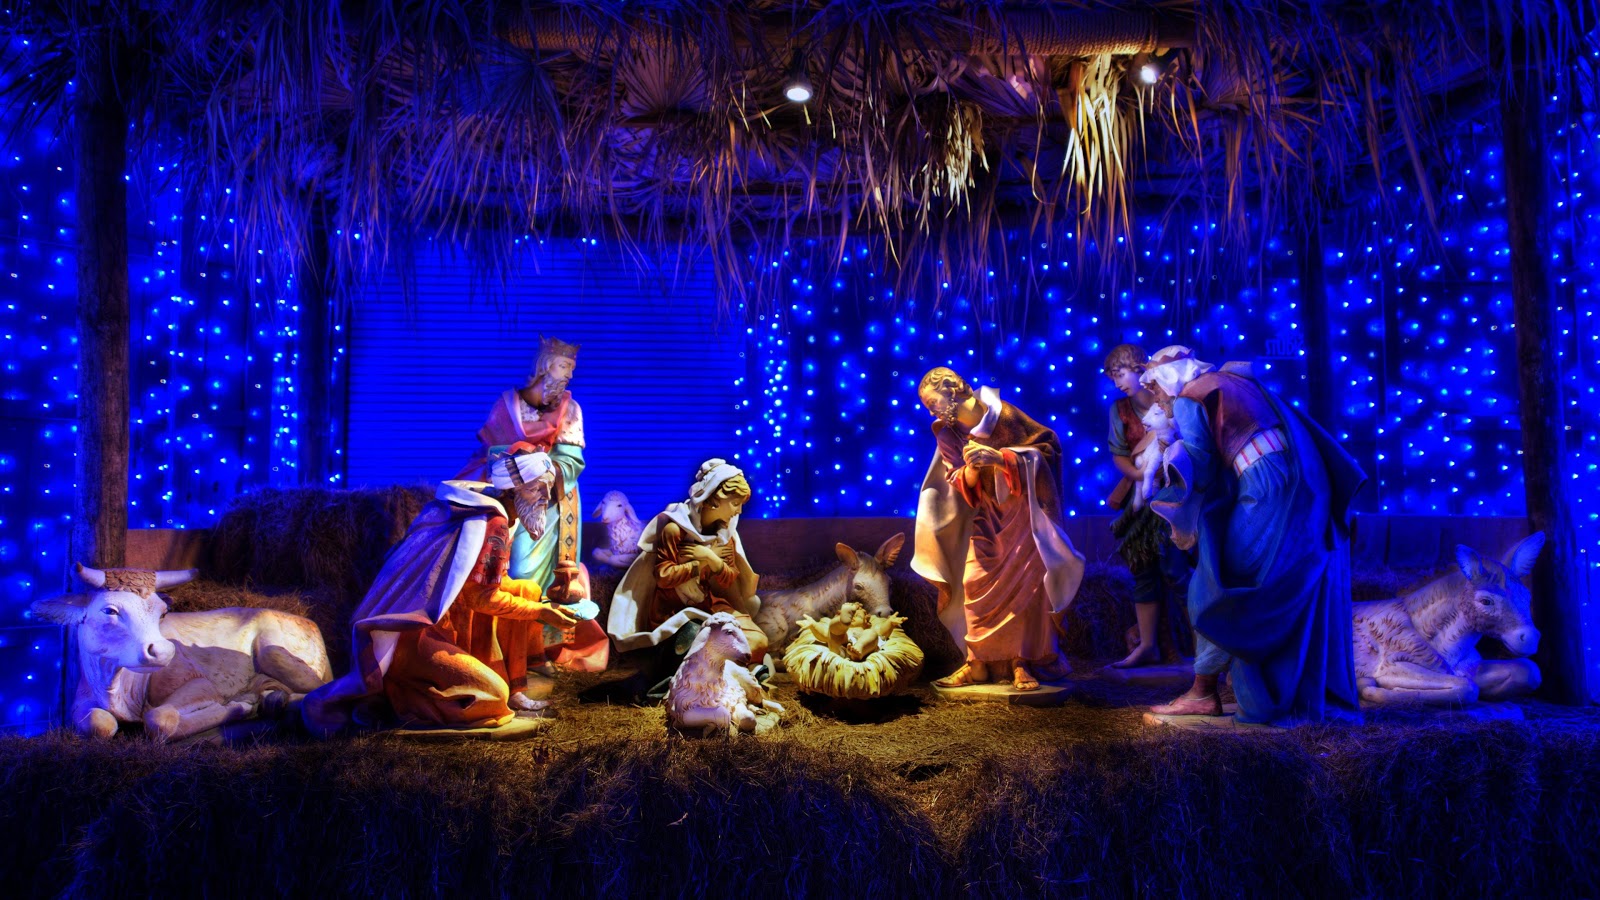 Christmas Crib Wallpaper Android Apps On Google Play